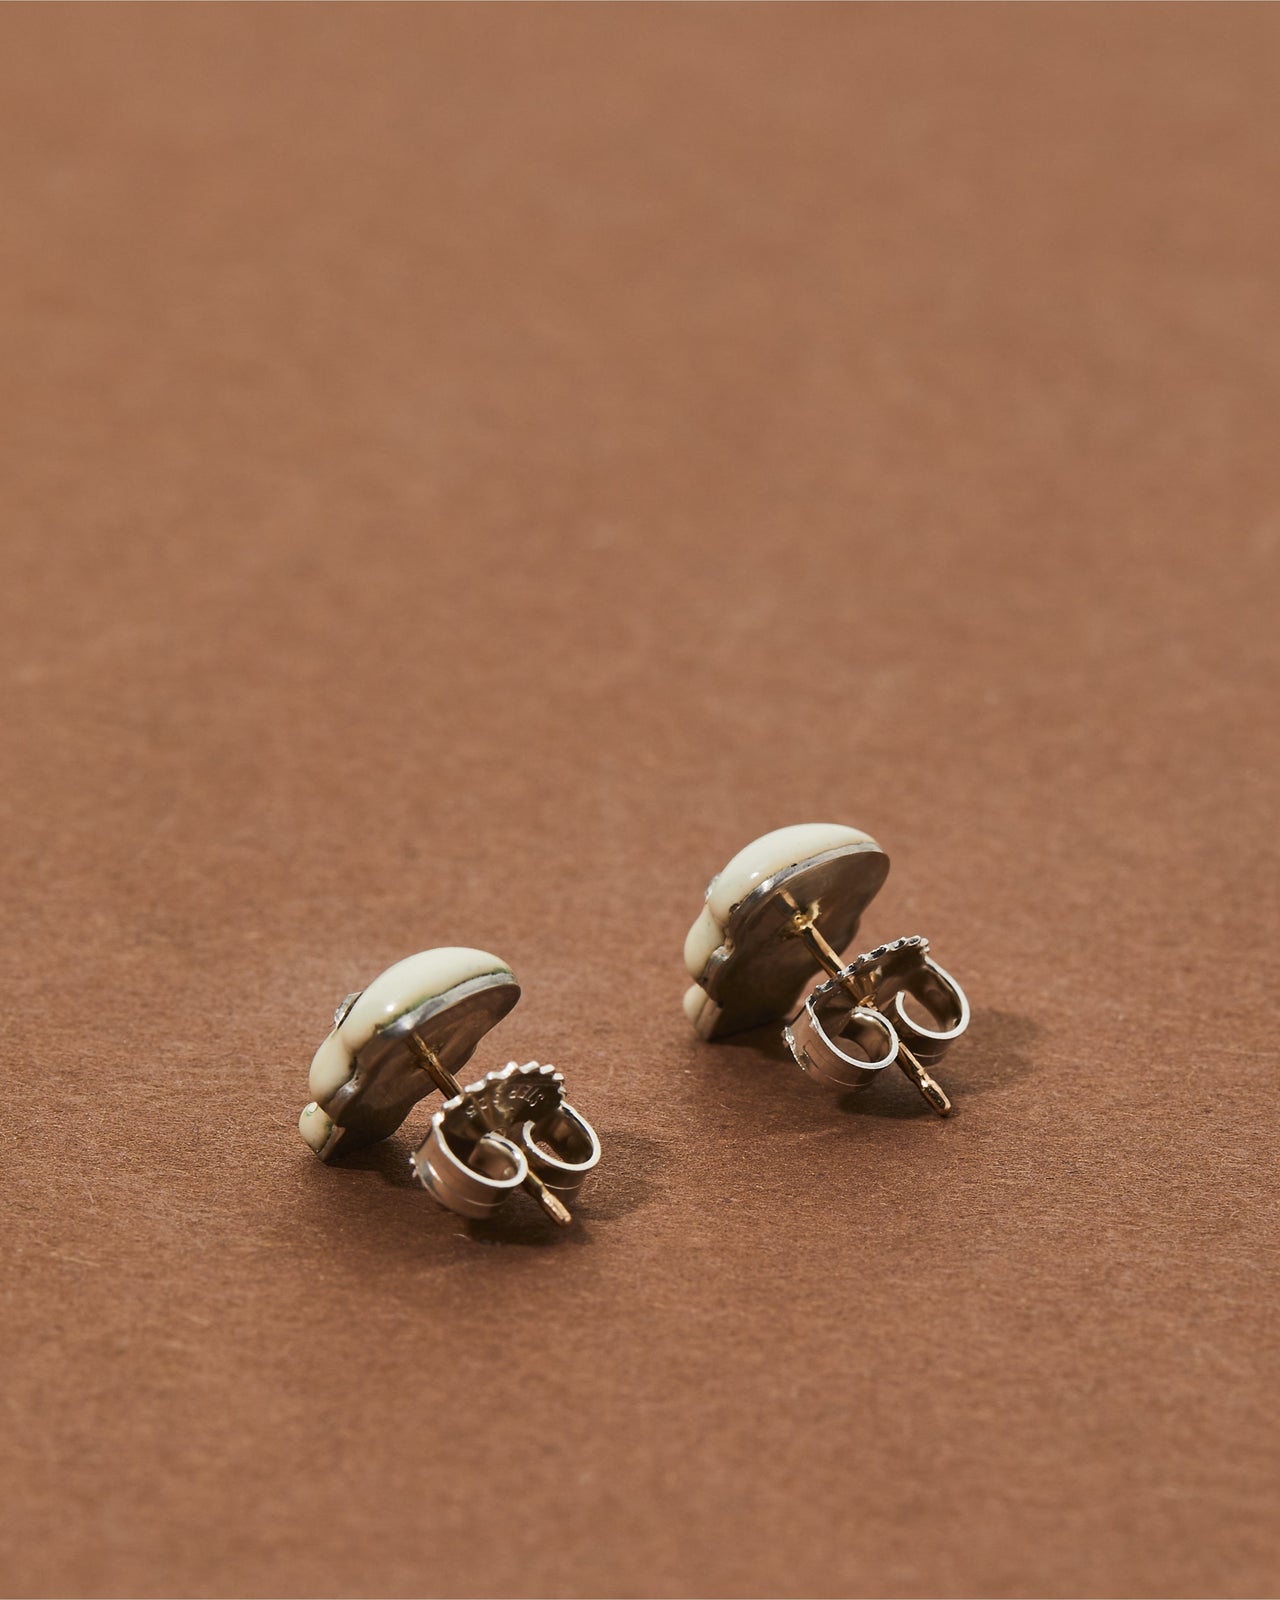 Enamel and Sterling Silver Mori Stud Earrings with Paste Eyes - Photo 2